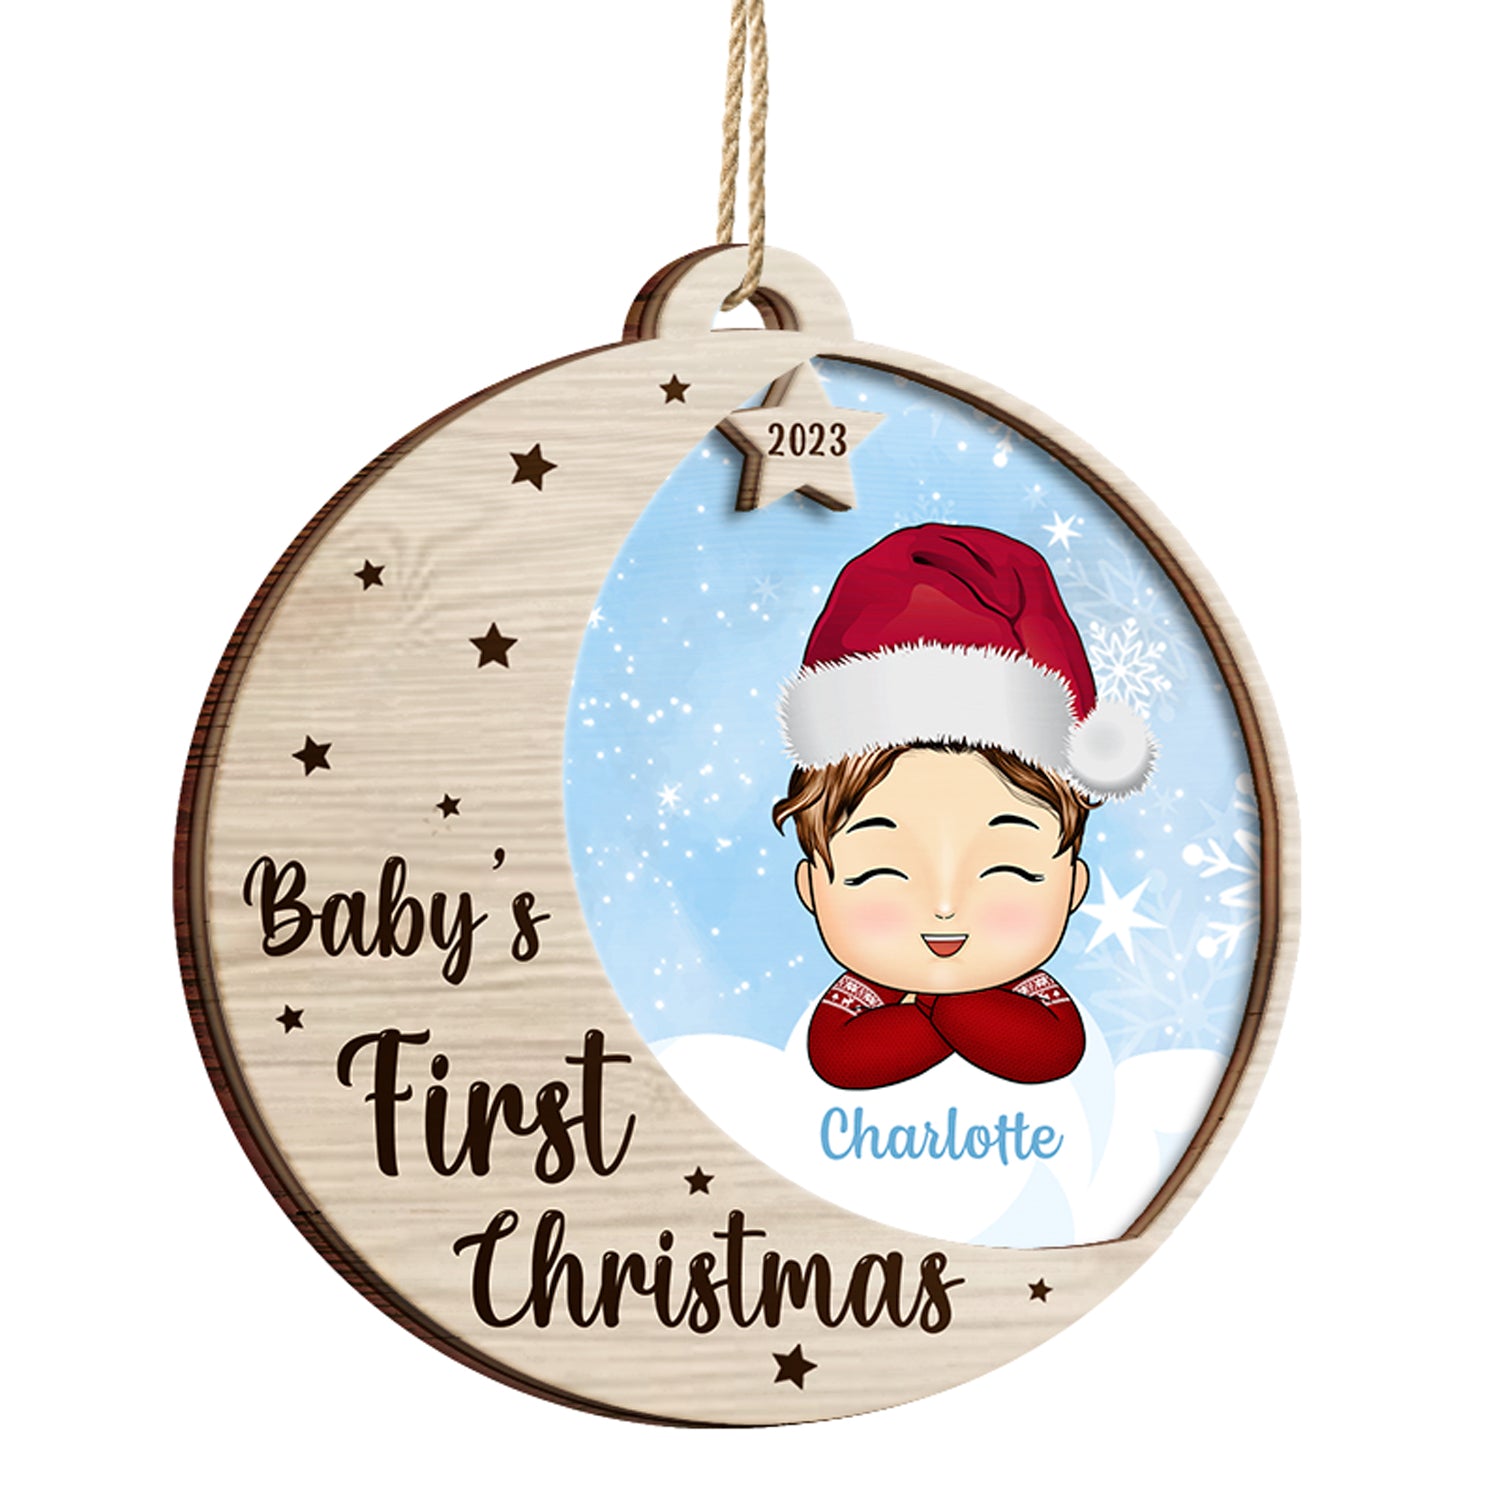 New Baby's First Christmas - Personalized 2-Layered Wooden Ornament